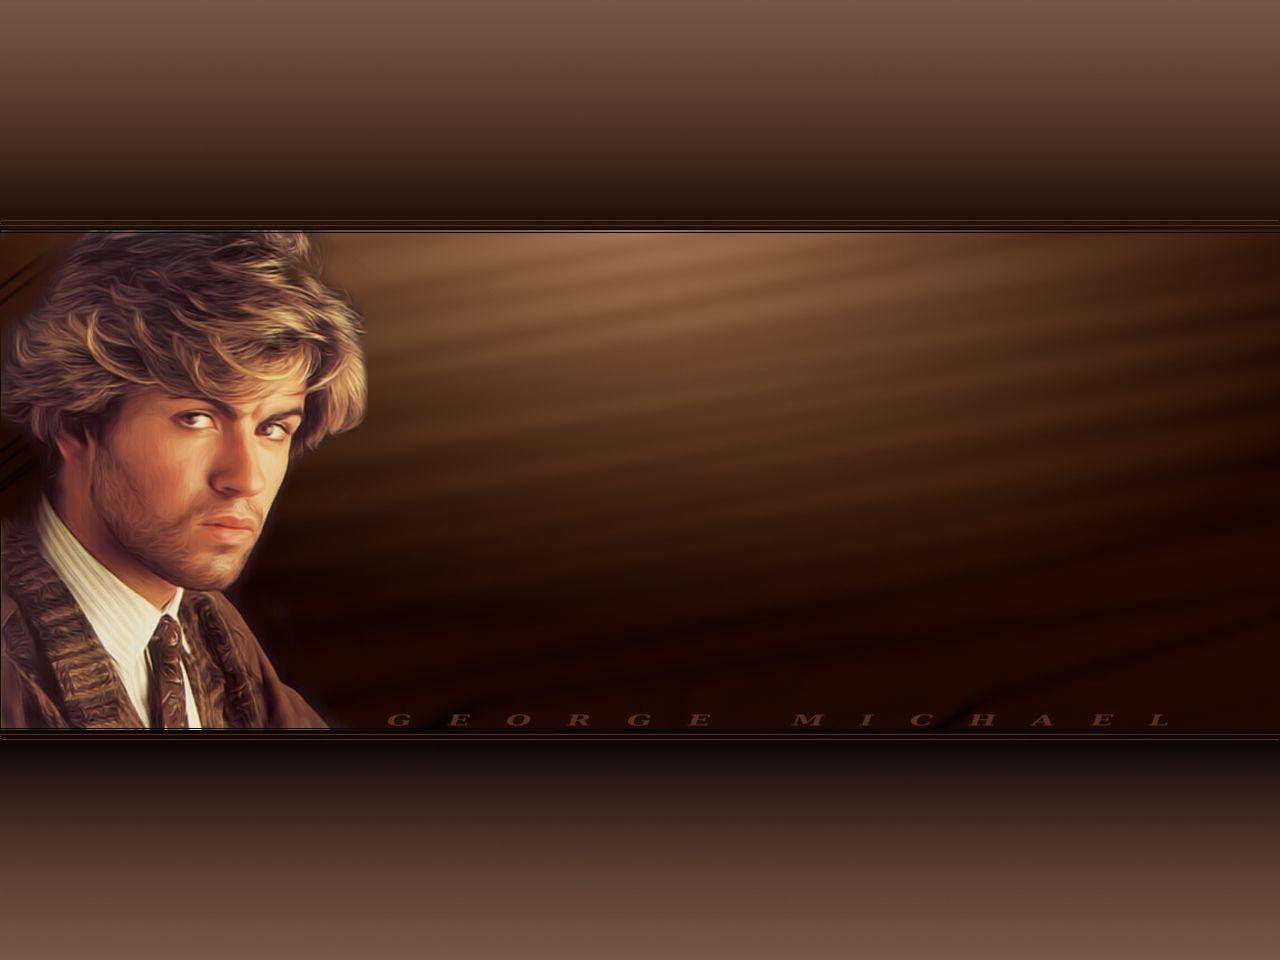 Image detail for -George michael Wallpaper. Photo, image, George